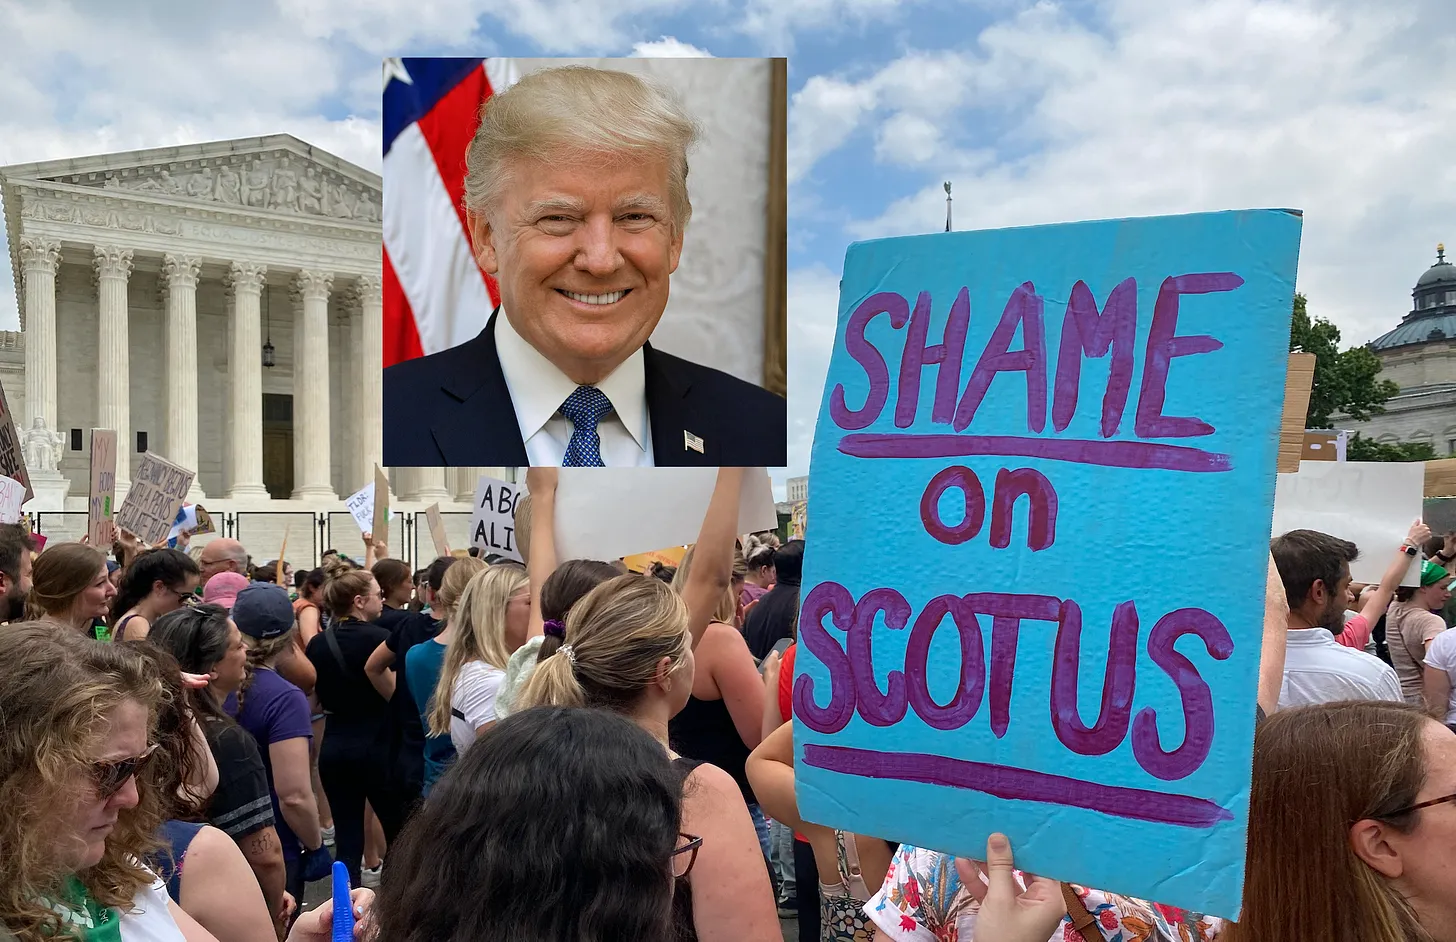 Trump dodges on abortion as SCOTUS cases highlighting anti-abortion extremism approach (lawdork.com)